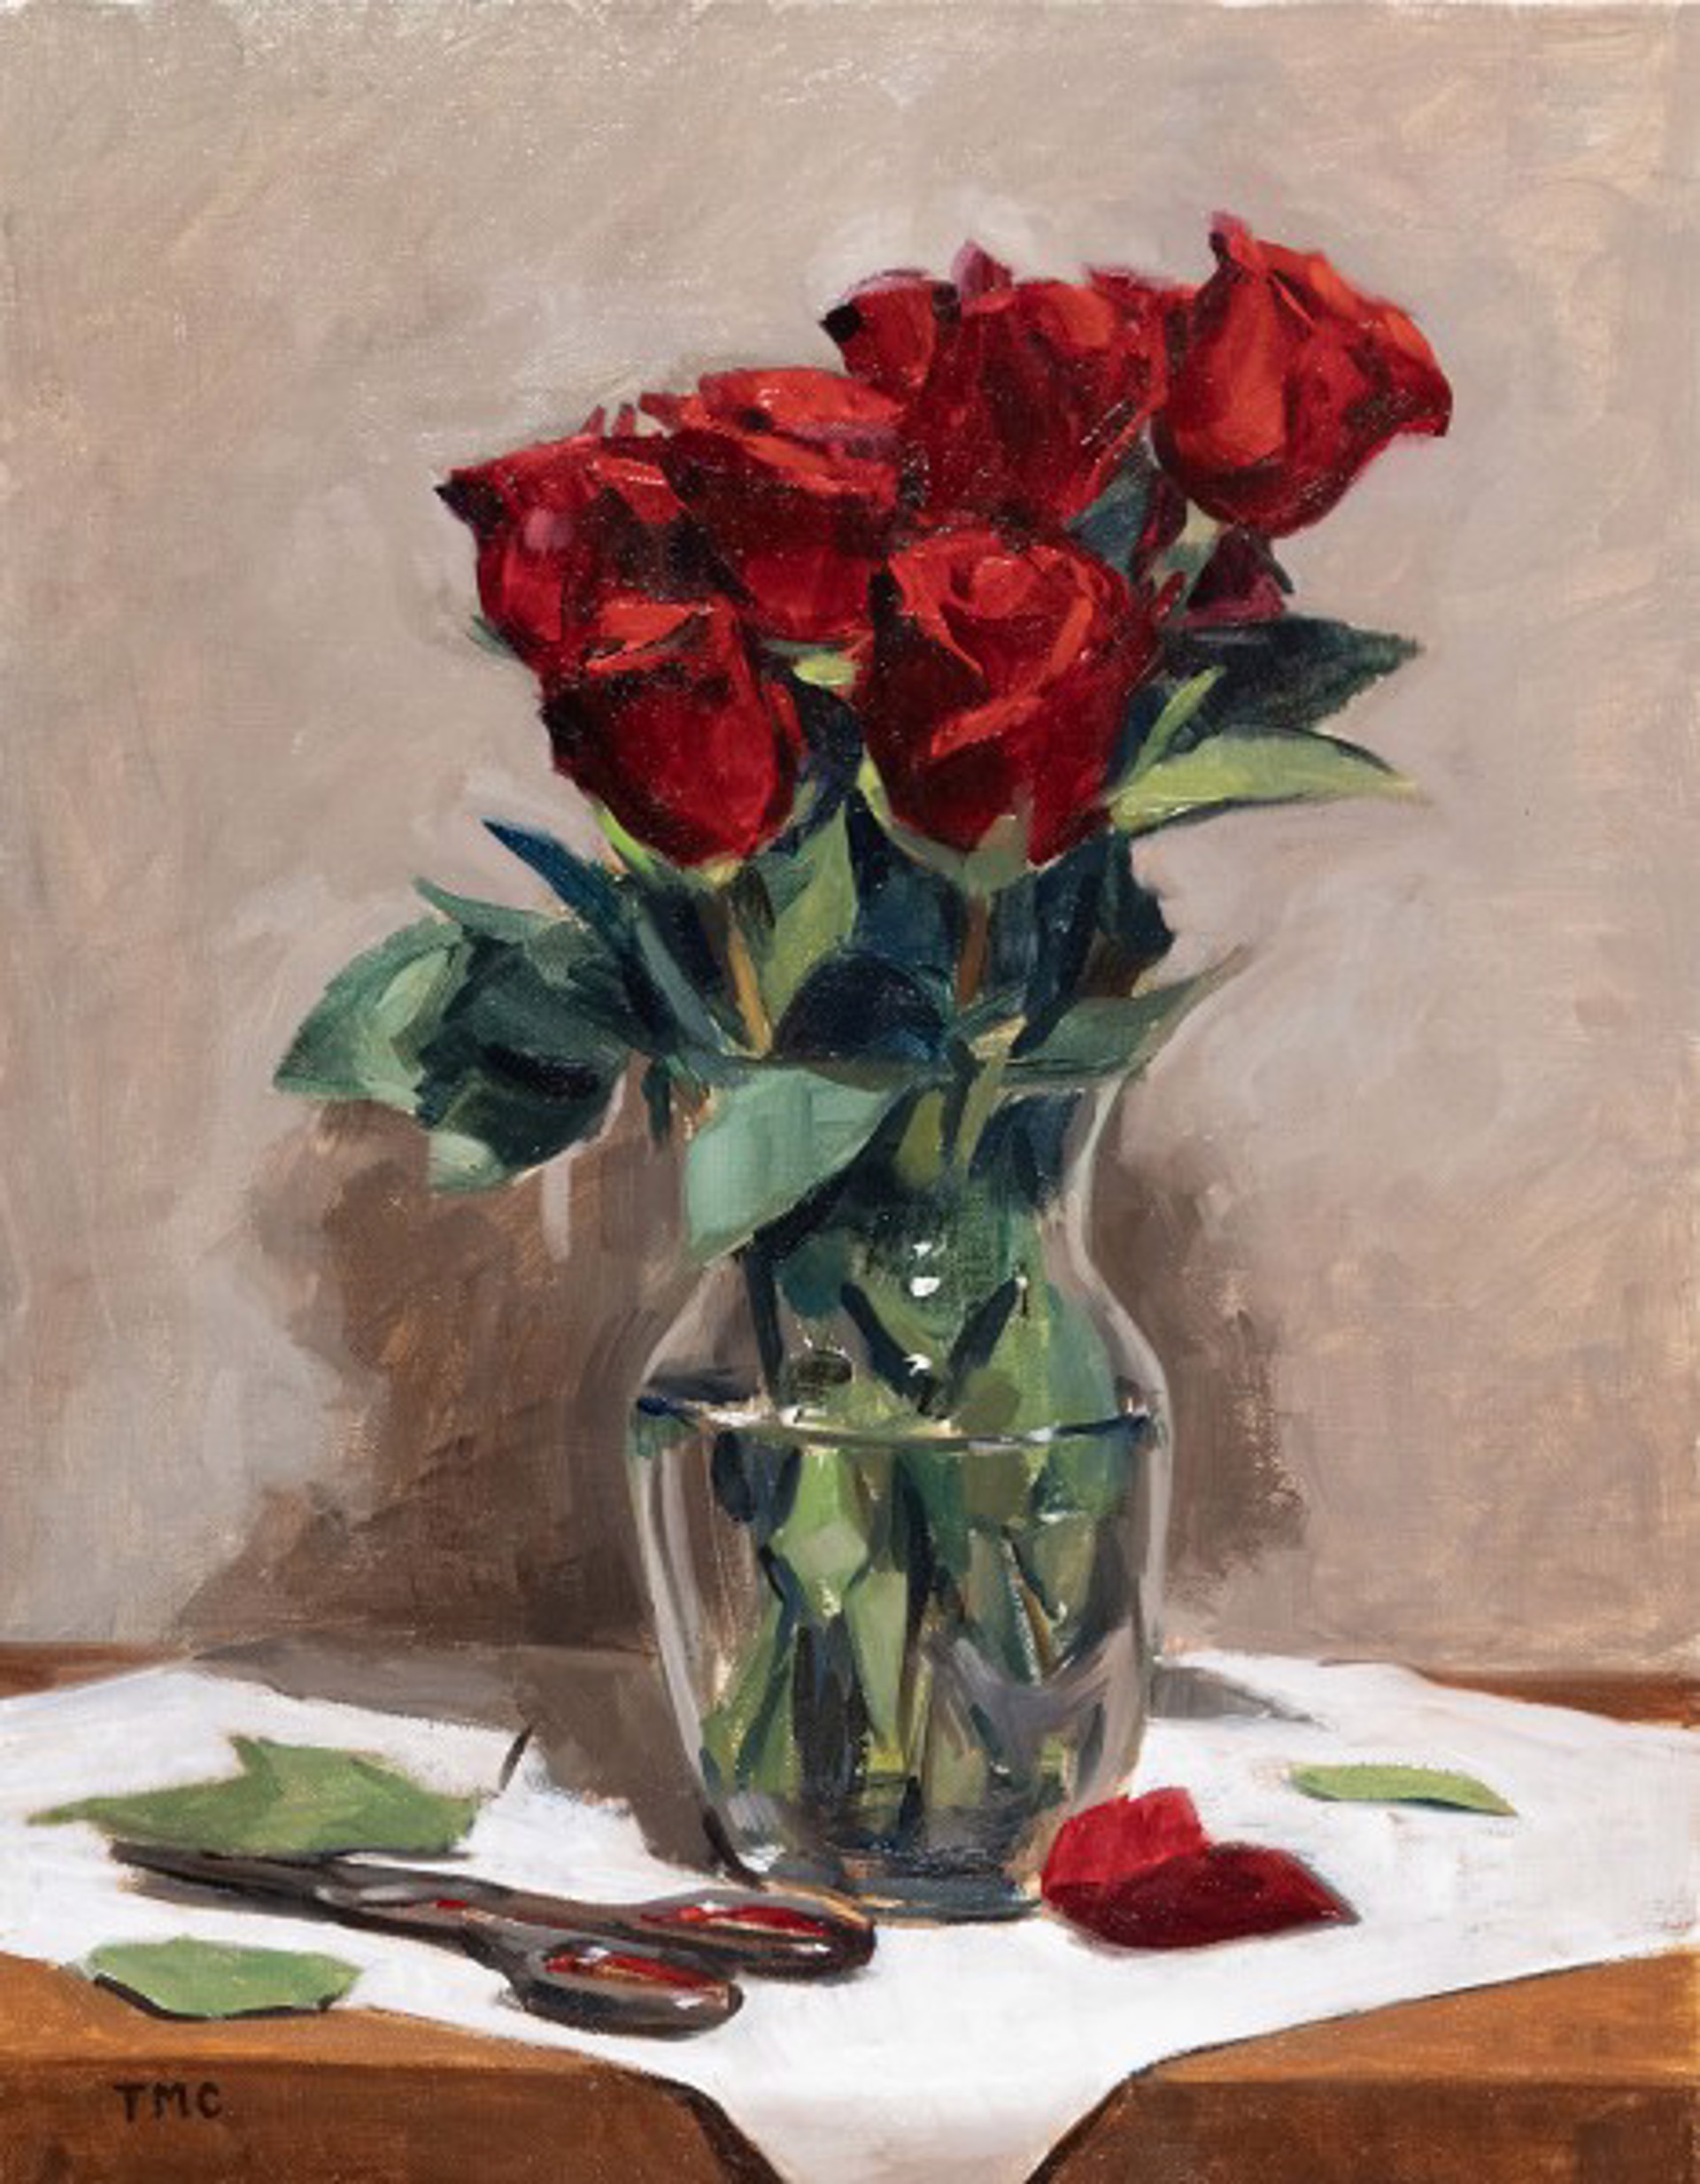 Red Roses by Todd M. Casey